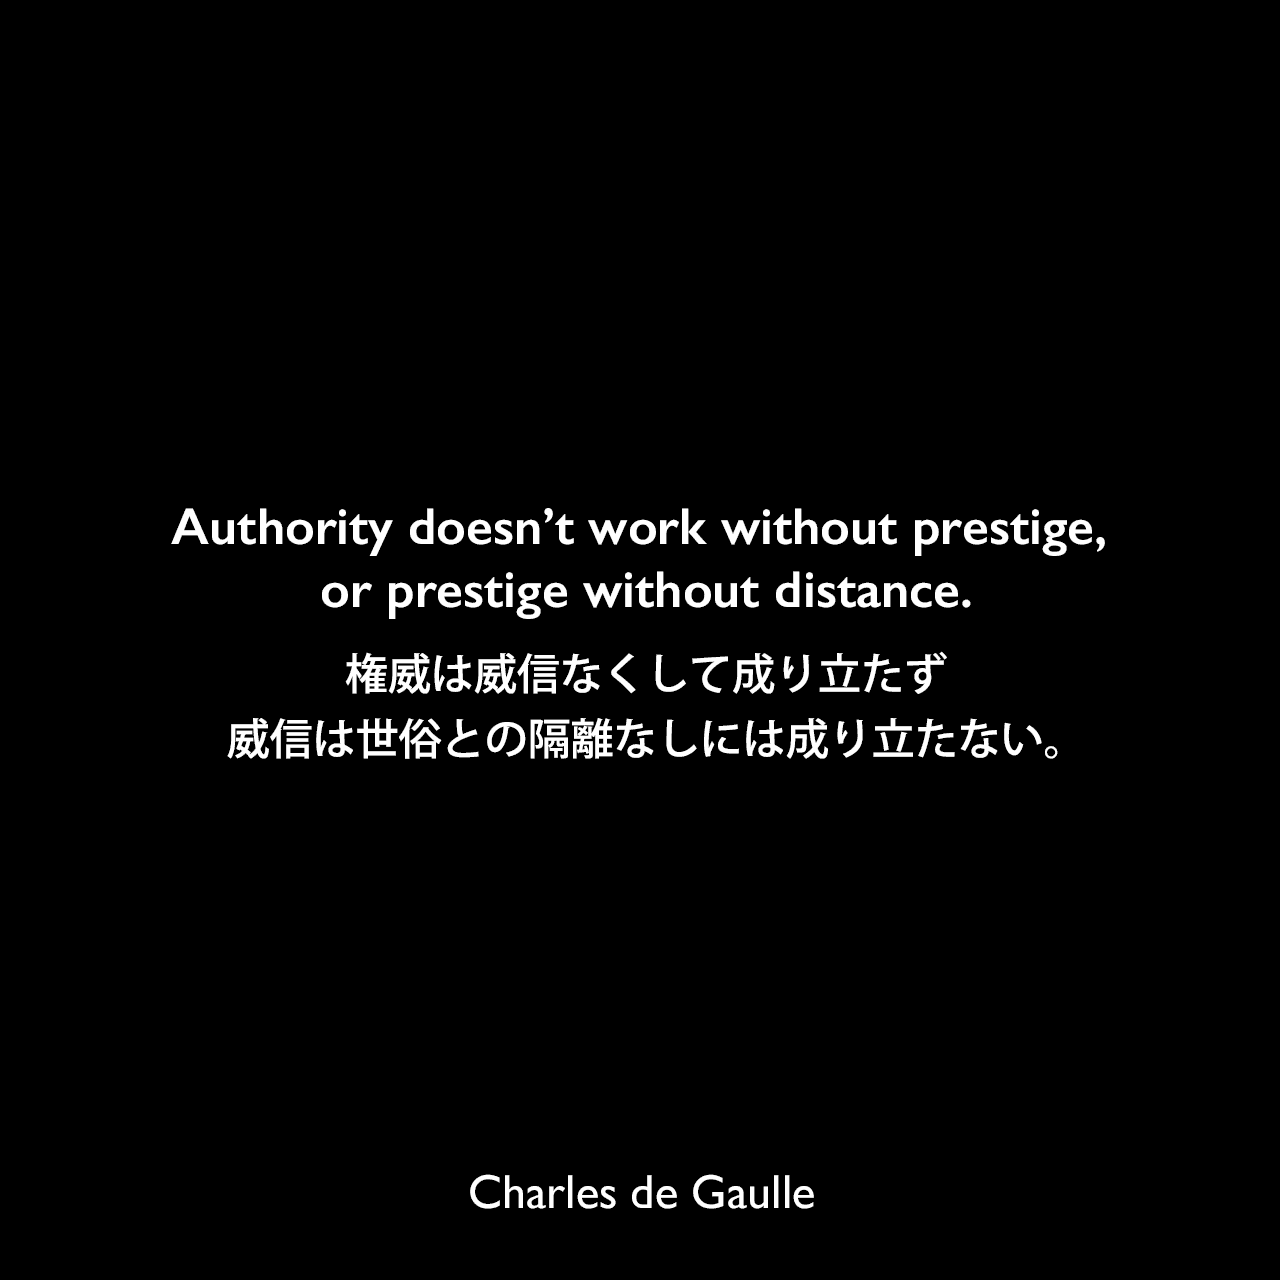 Authority doesn’t work without prestige, or prestige without distance.権威は威信なくして成り立たず、威信は世俗との隔離なしには成り立たない。Charles de Gaulle